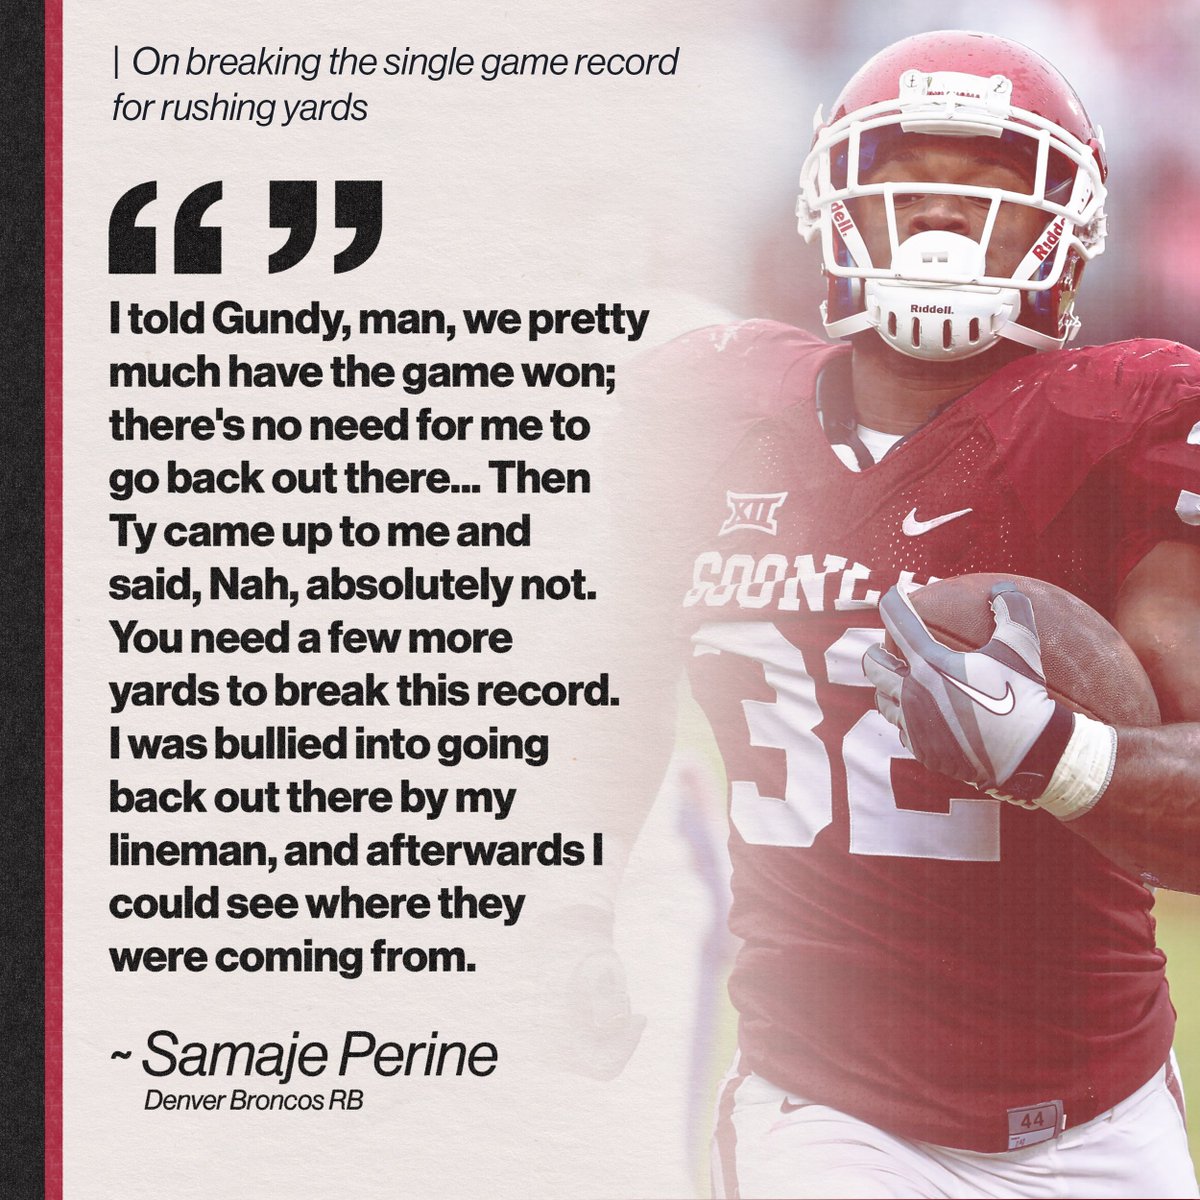 With the single-game rushing record at stake, @samajp32’s teammates were determined not to let him miss the opportunity. 💯